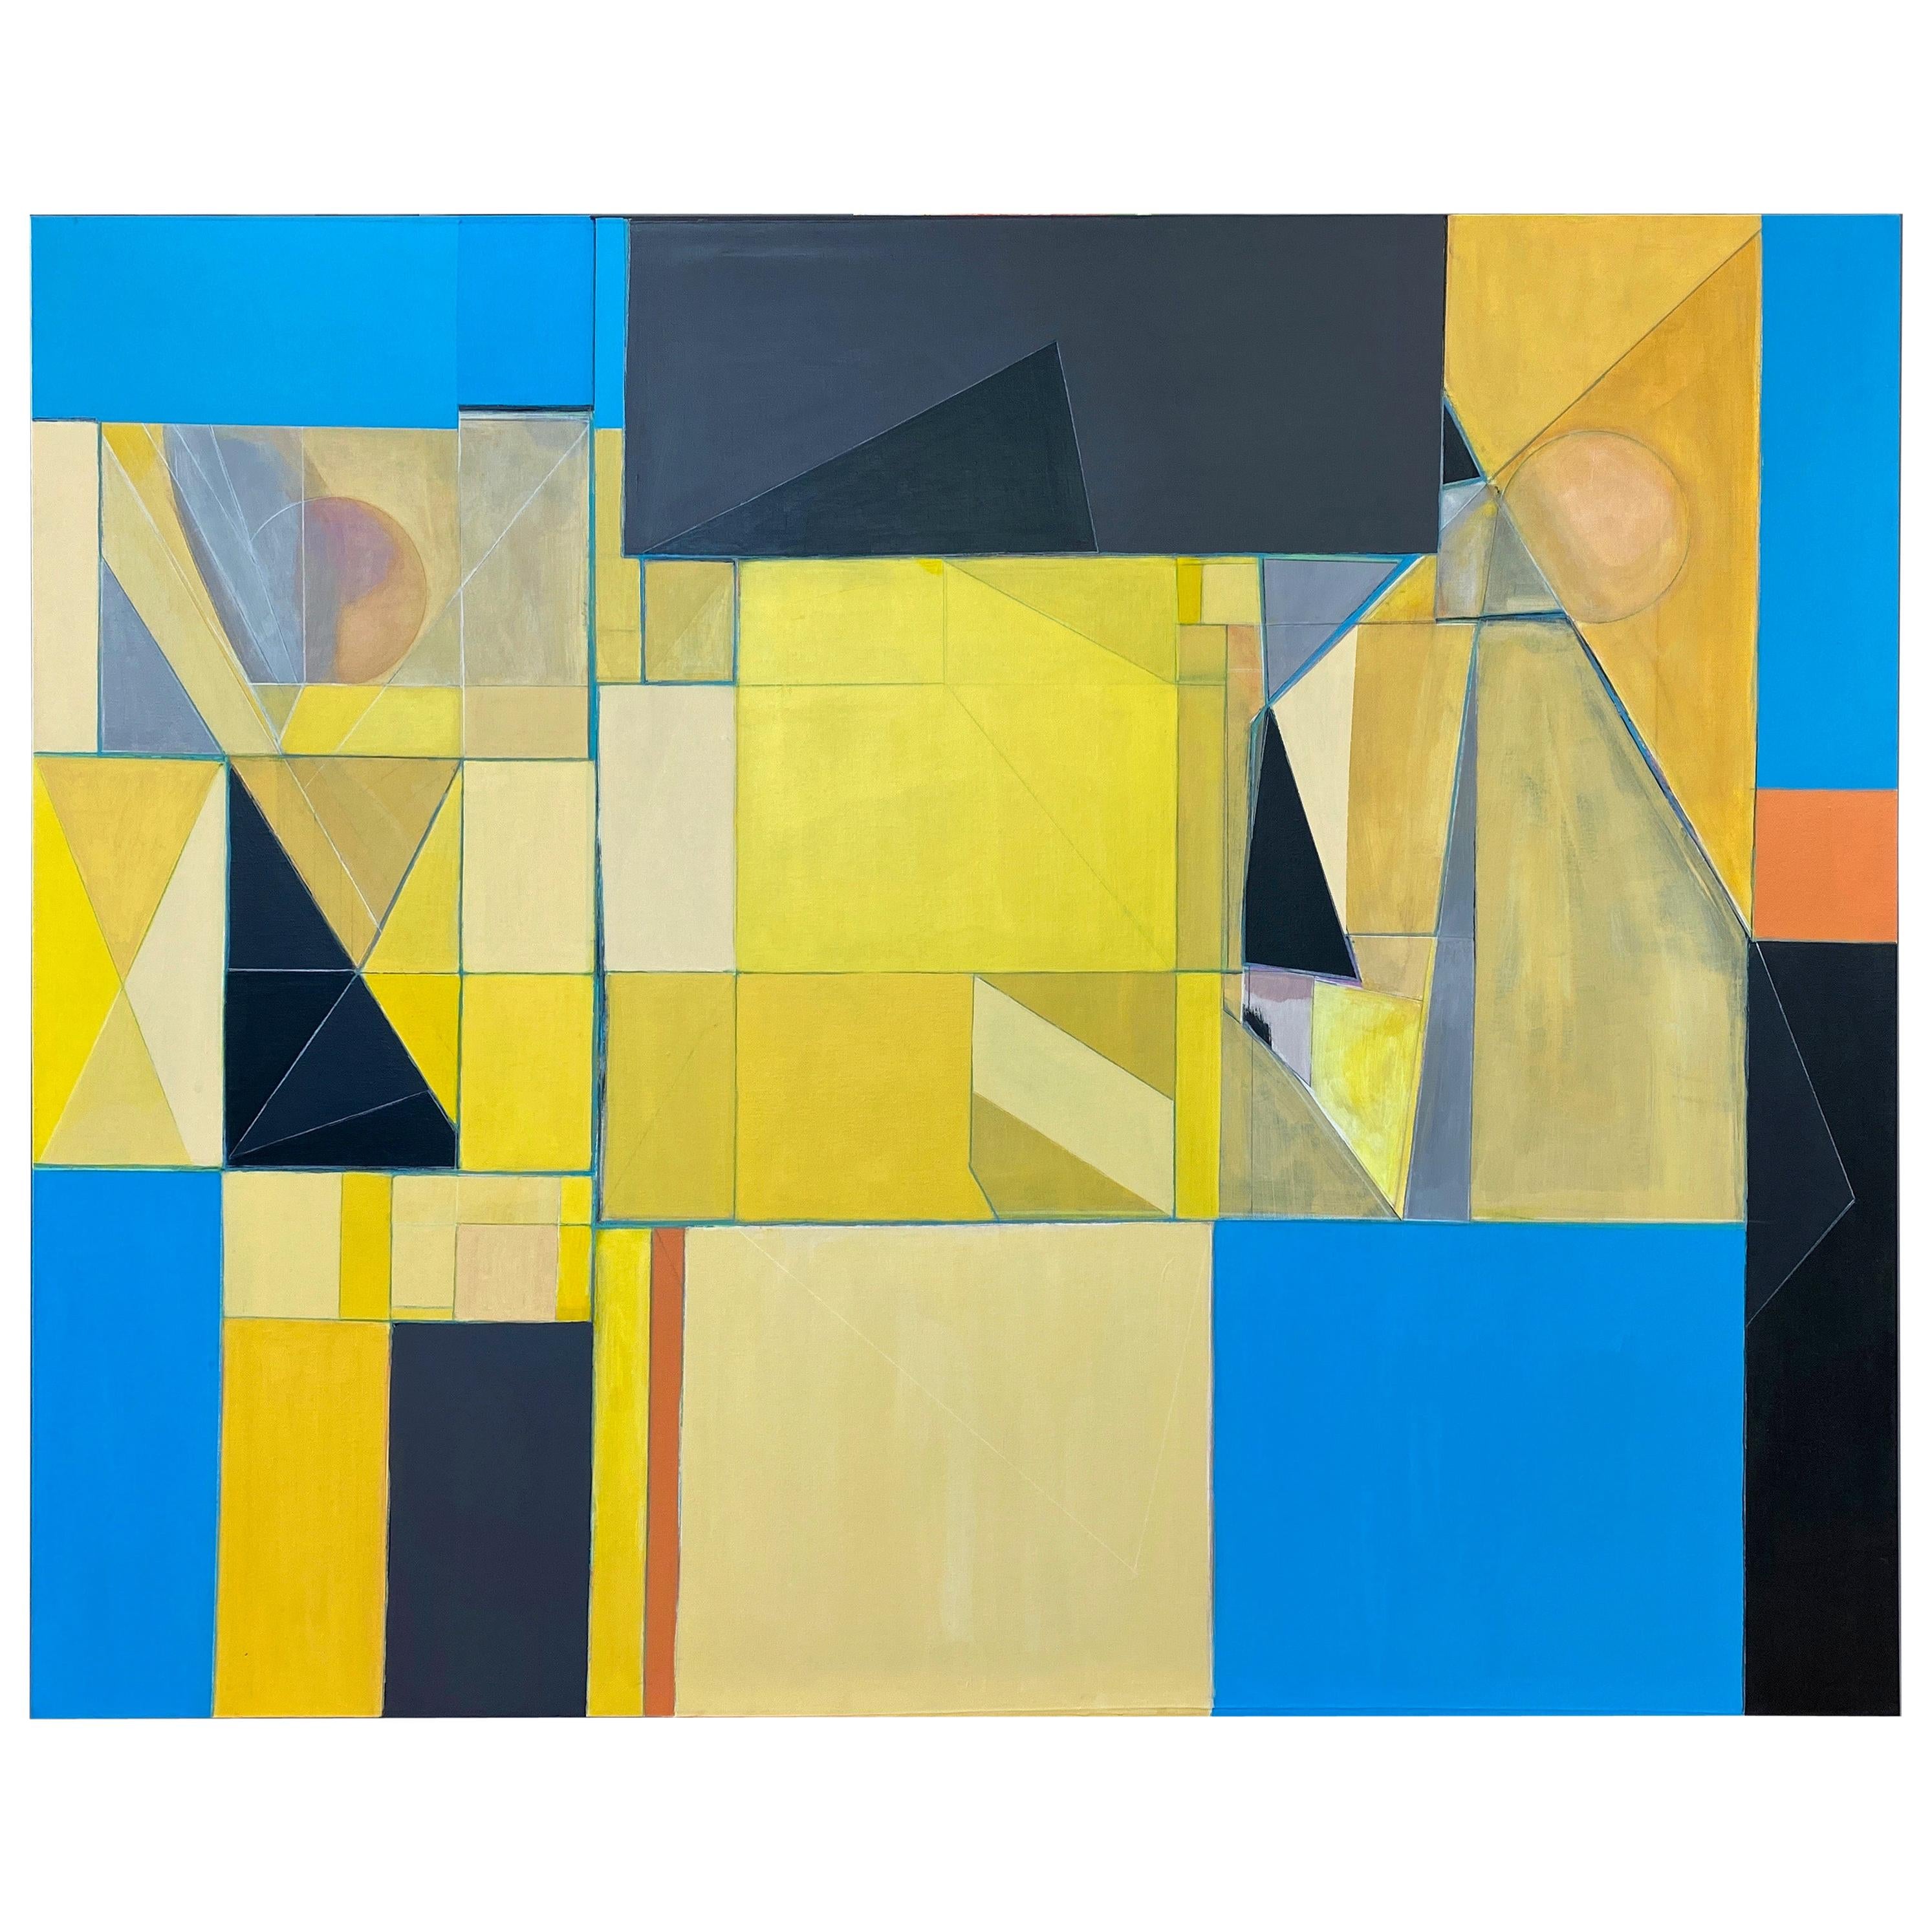 Robert English “Etheric Double”, Large Abstract Cubist Painting, 1994-1995